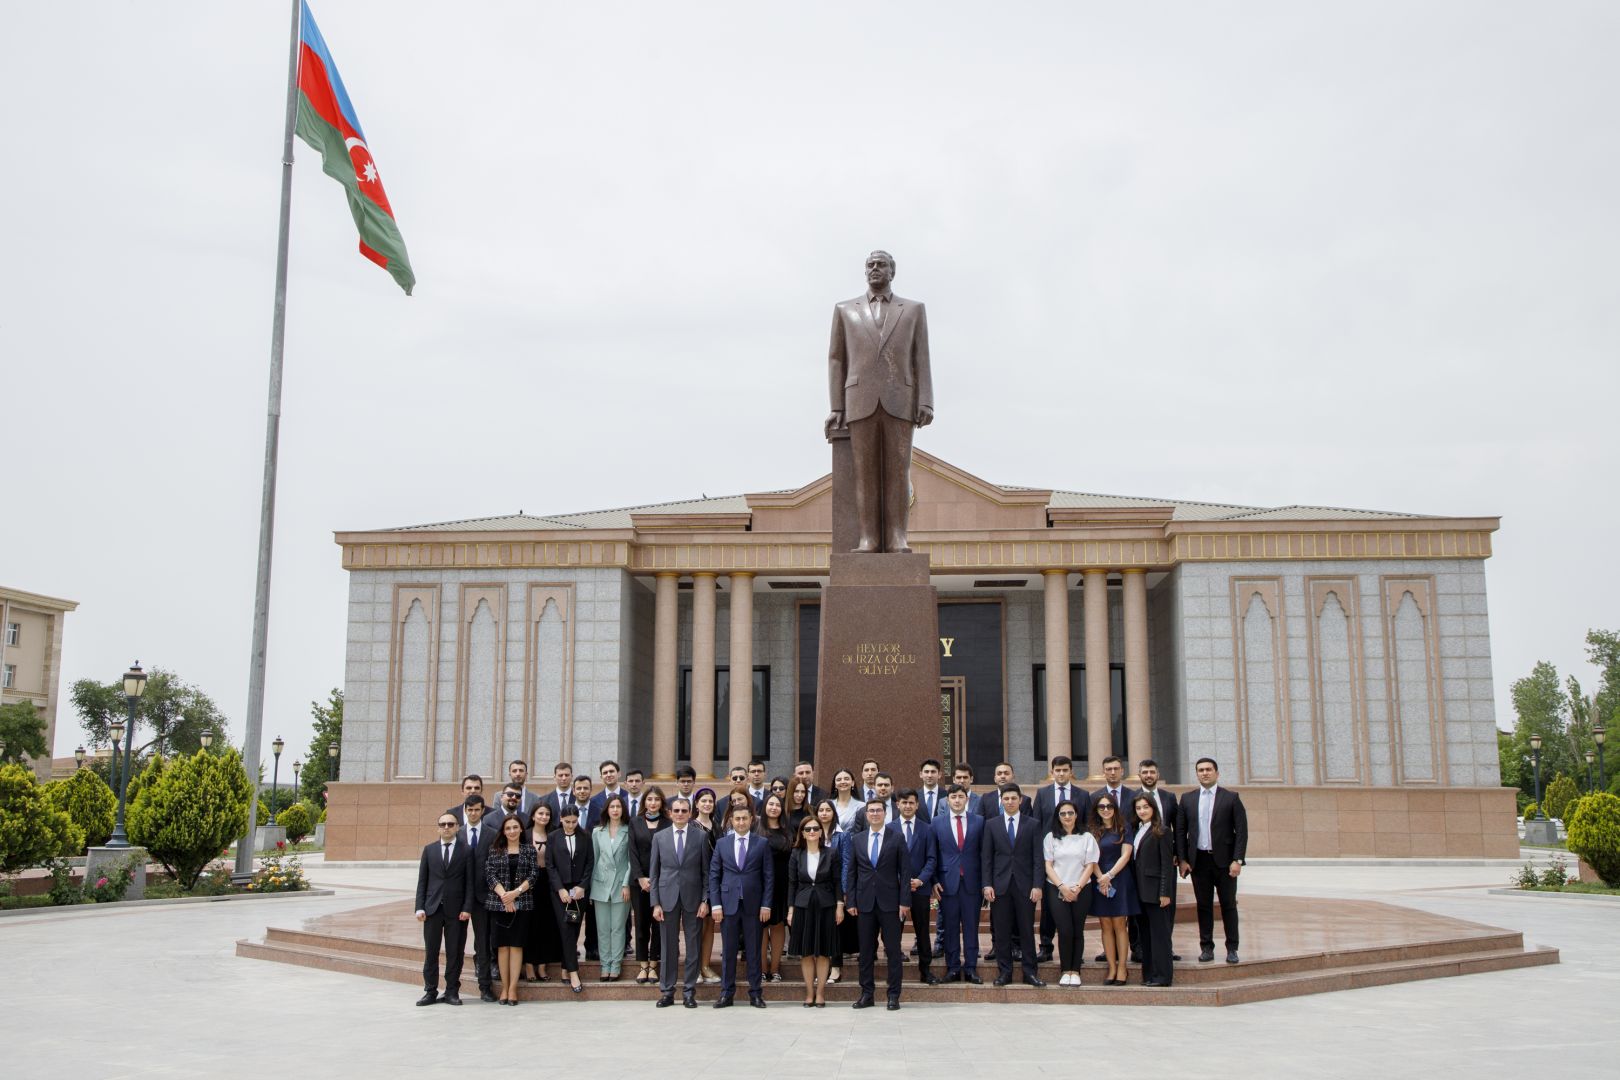 Participants of "Foreign Policy Program" for young diplomats visit Nakhchivan